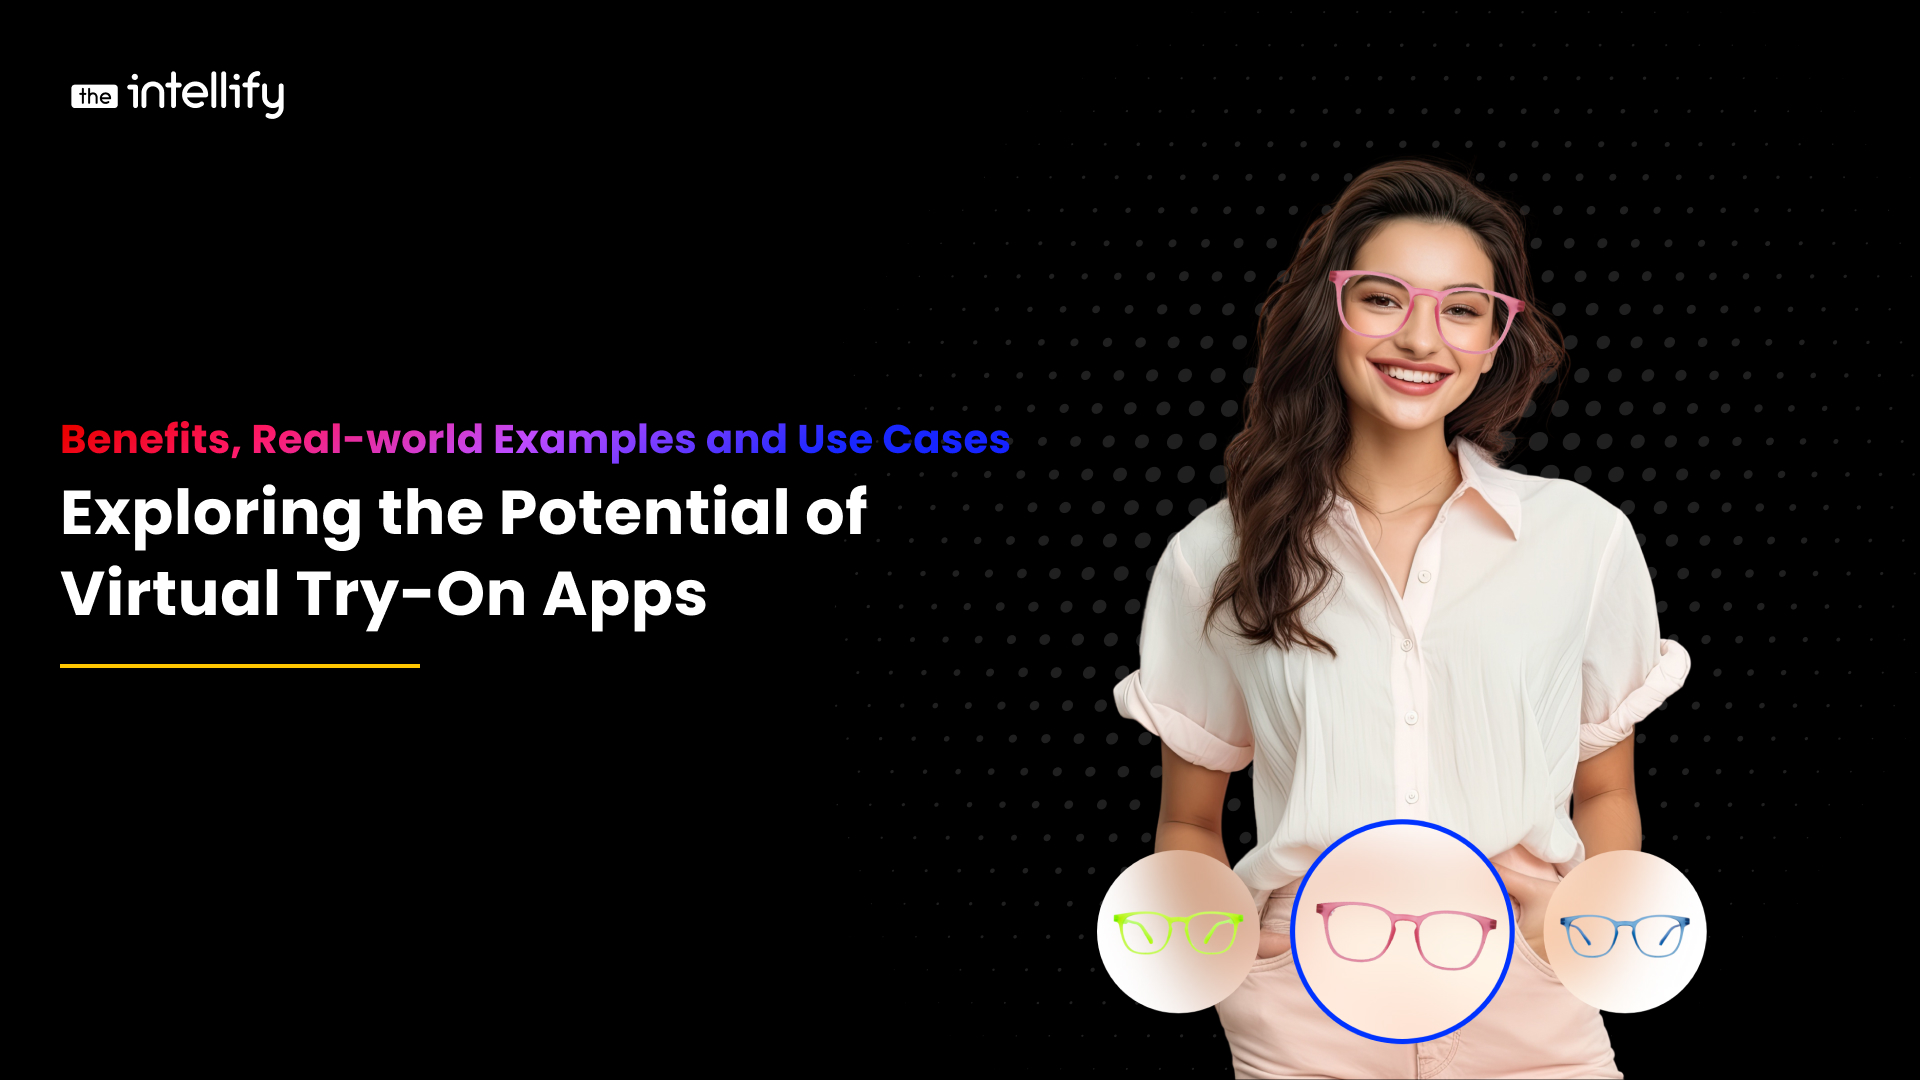 Virtual Try-on App Development: Benefits, Examples and Use Cases